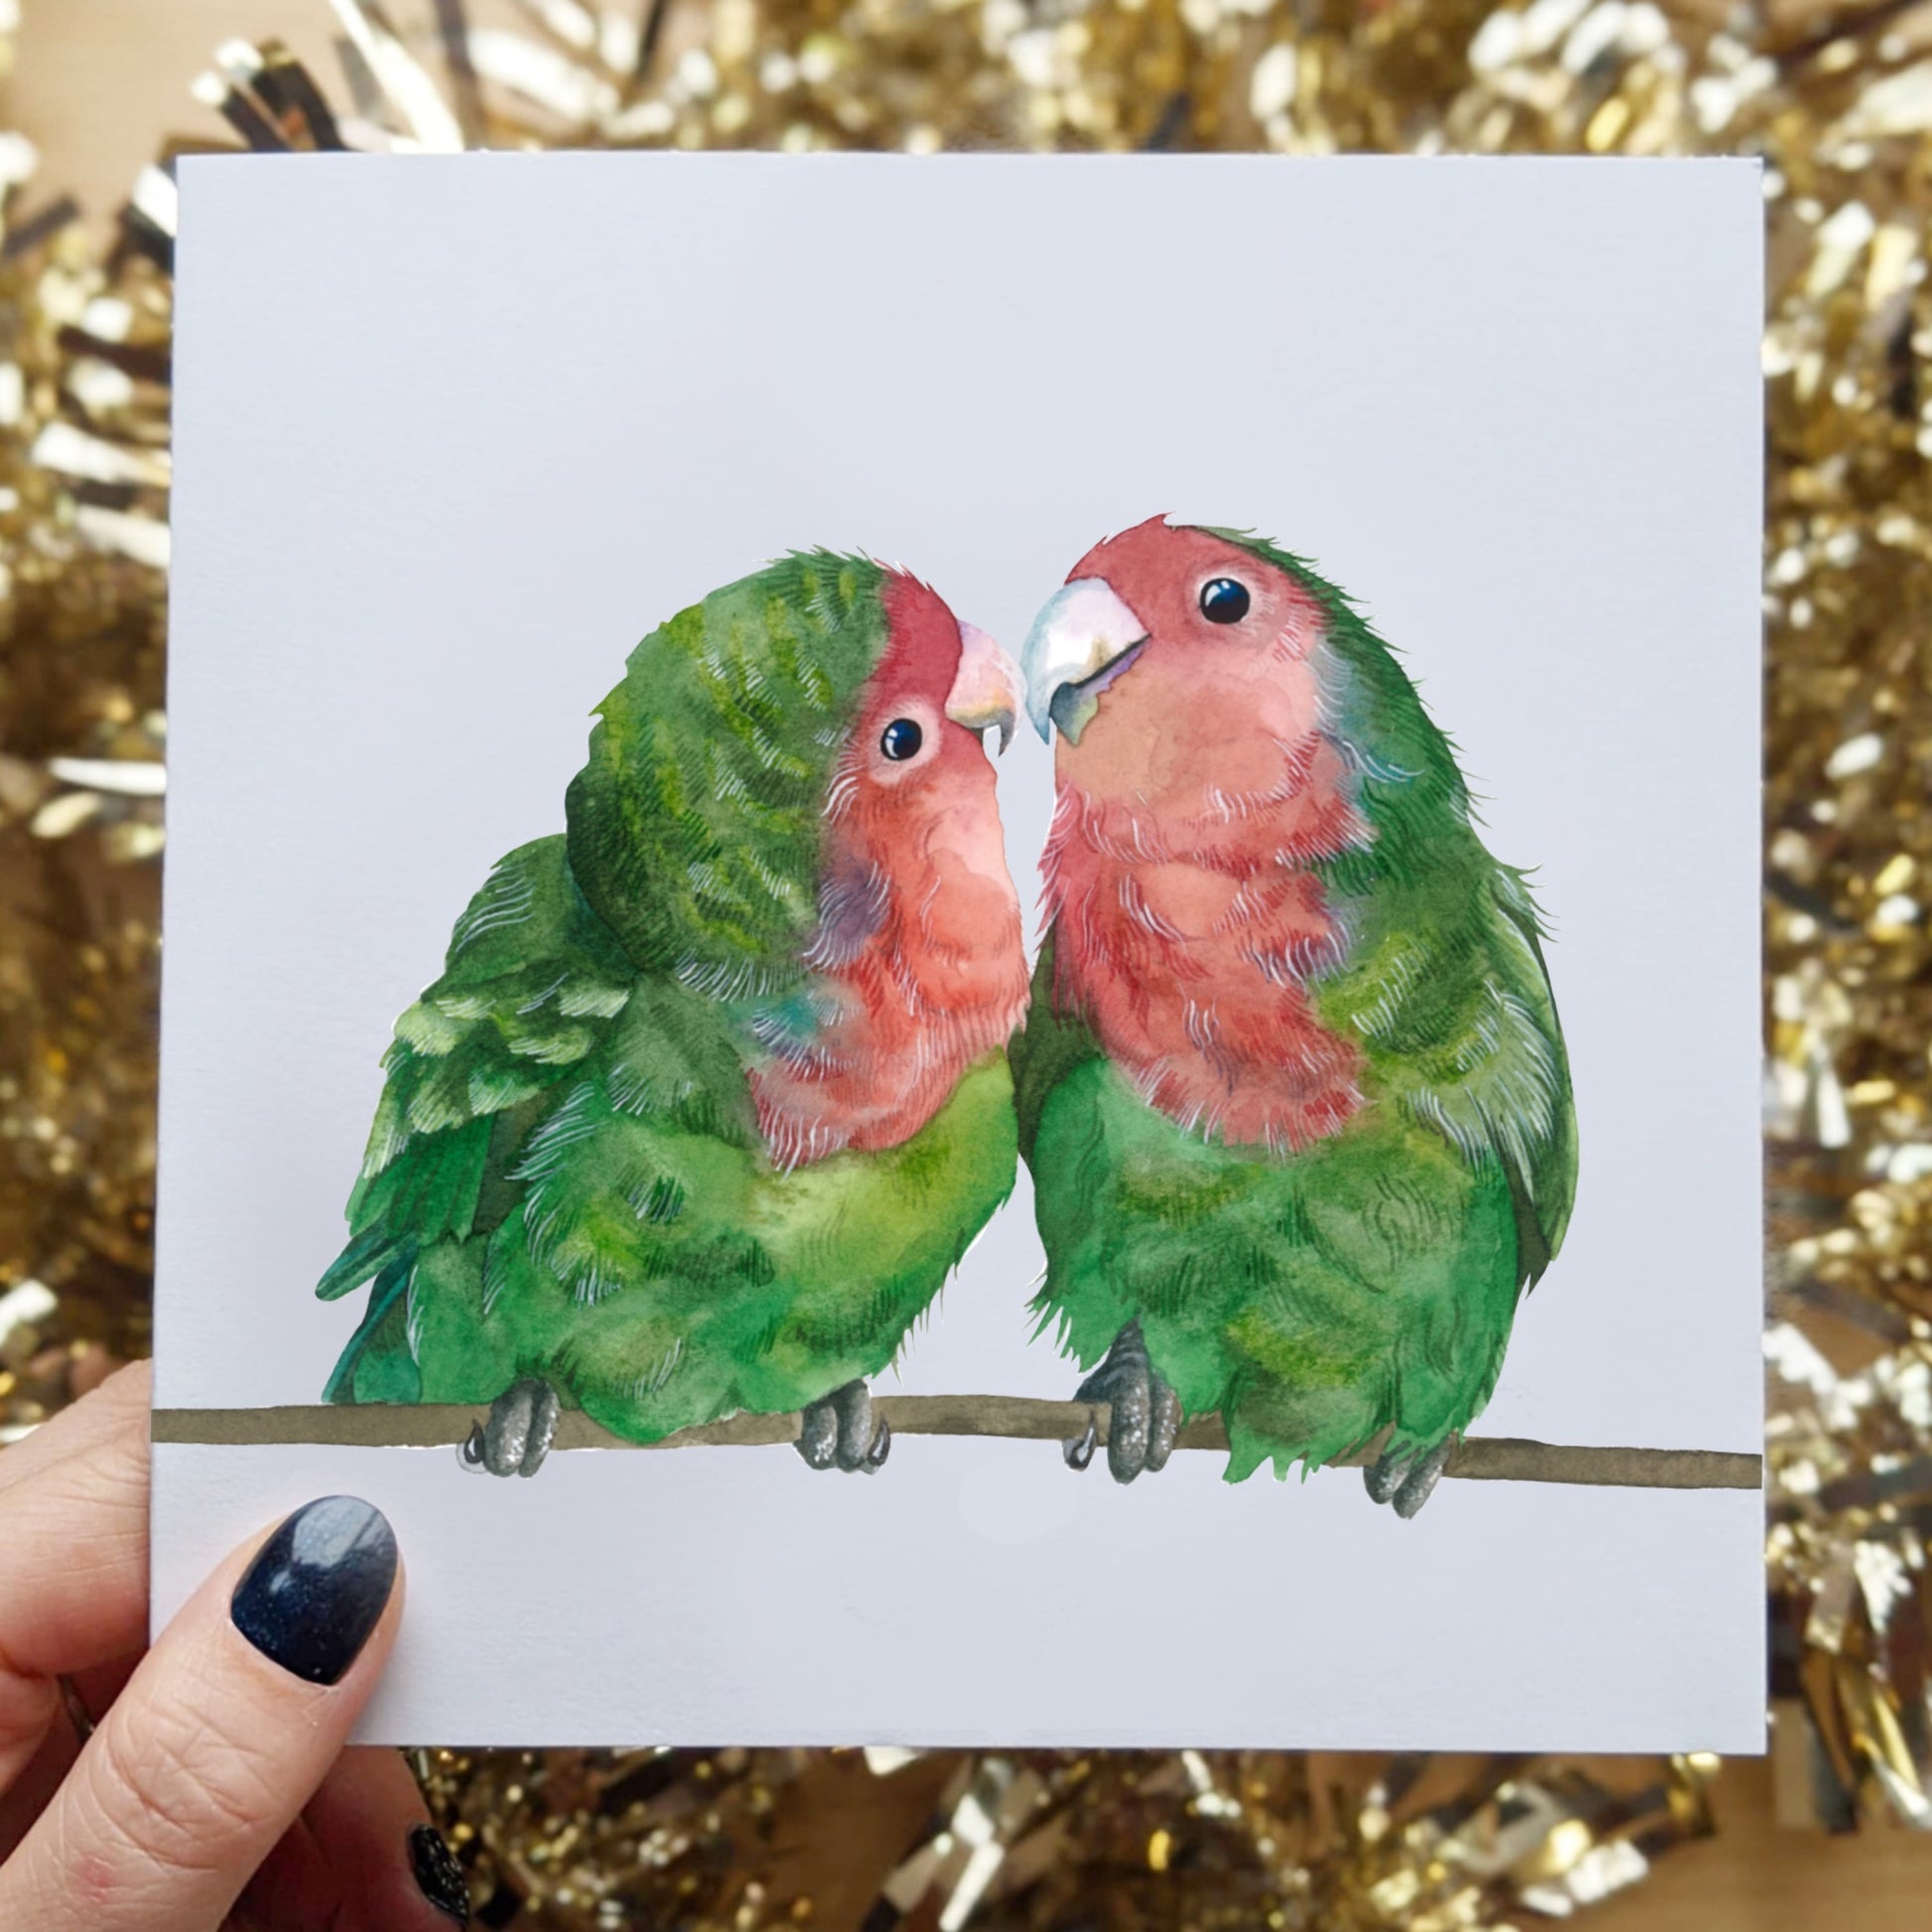 The cutest watercoloring of Love Birds. So sweet, their bright green and pink coloring is so pretty. They are setting on branch kissing.